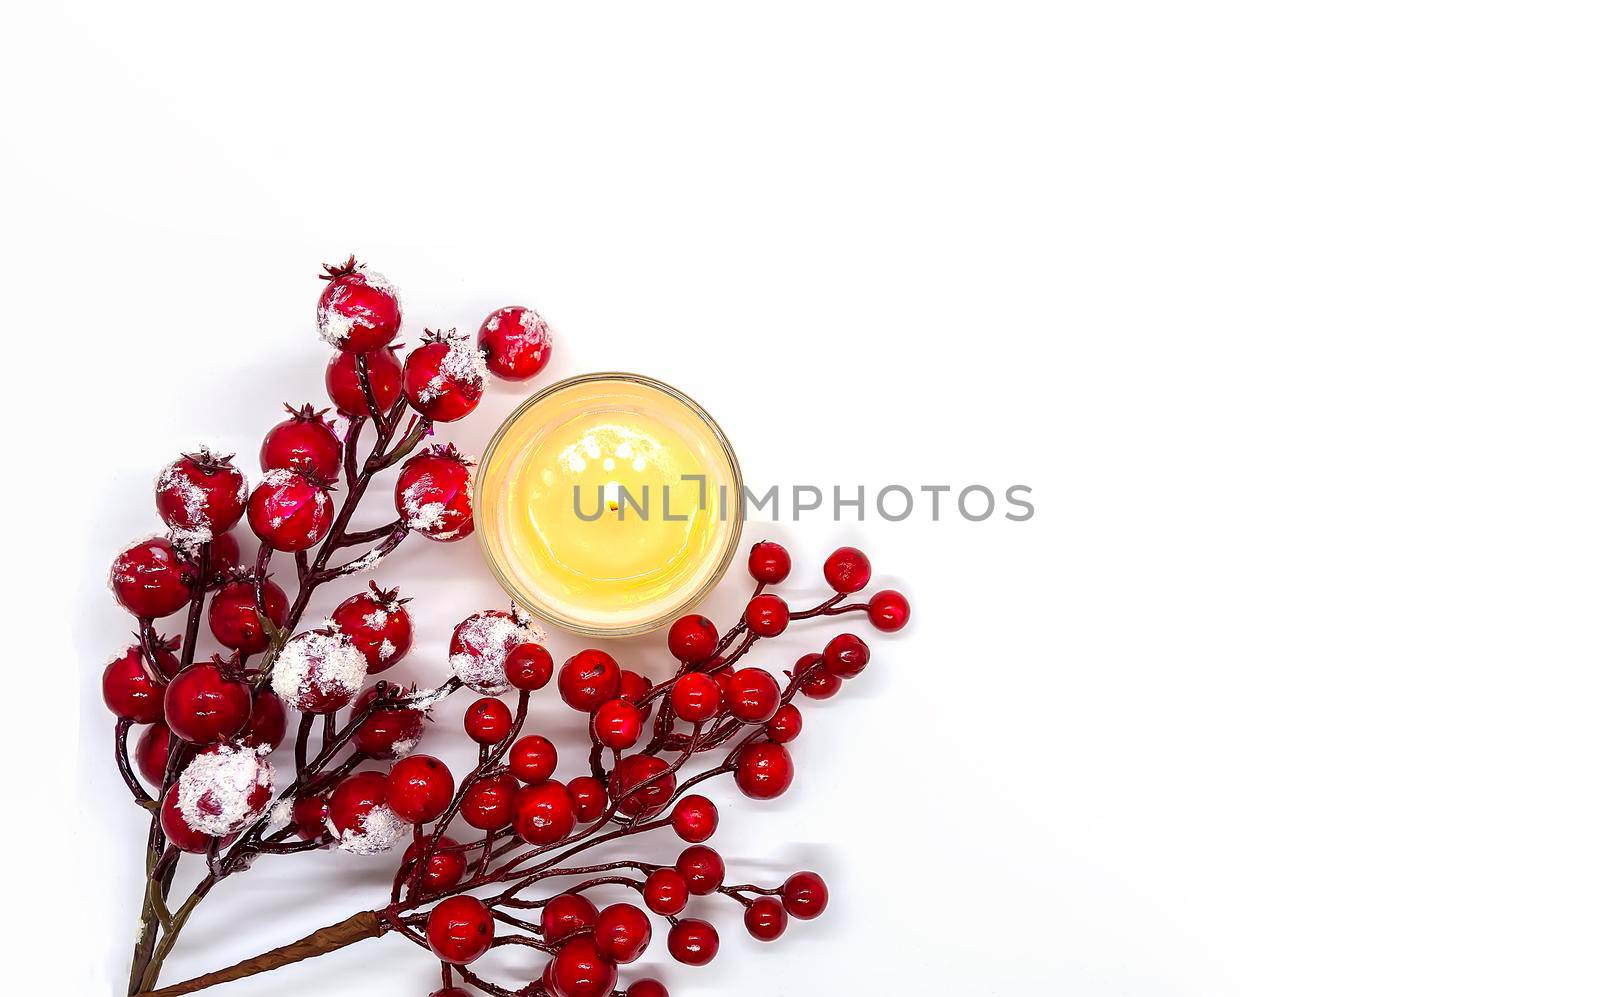 Festive Christmas or New Year composition with red holly berries in snow and burning wax candle on white background